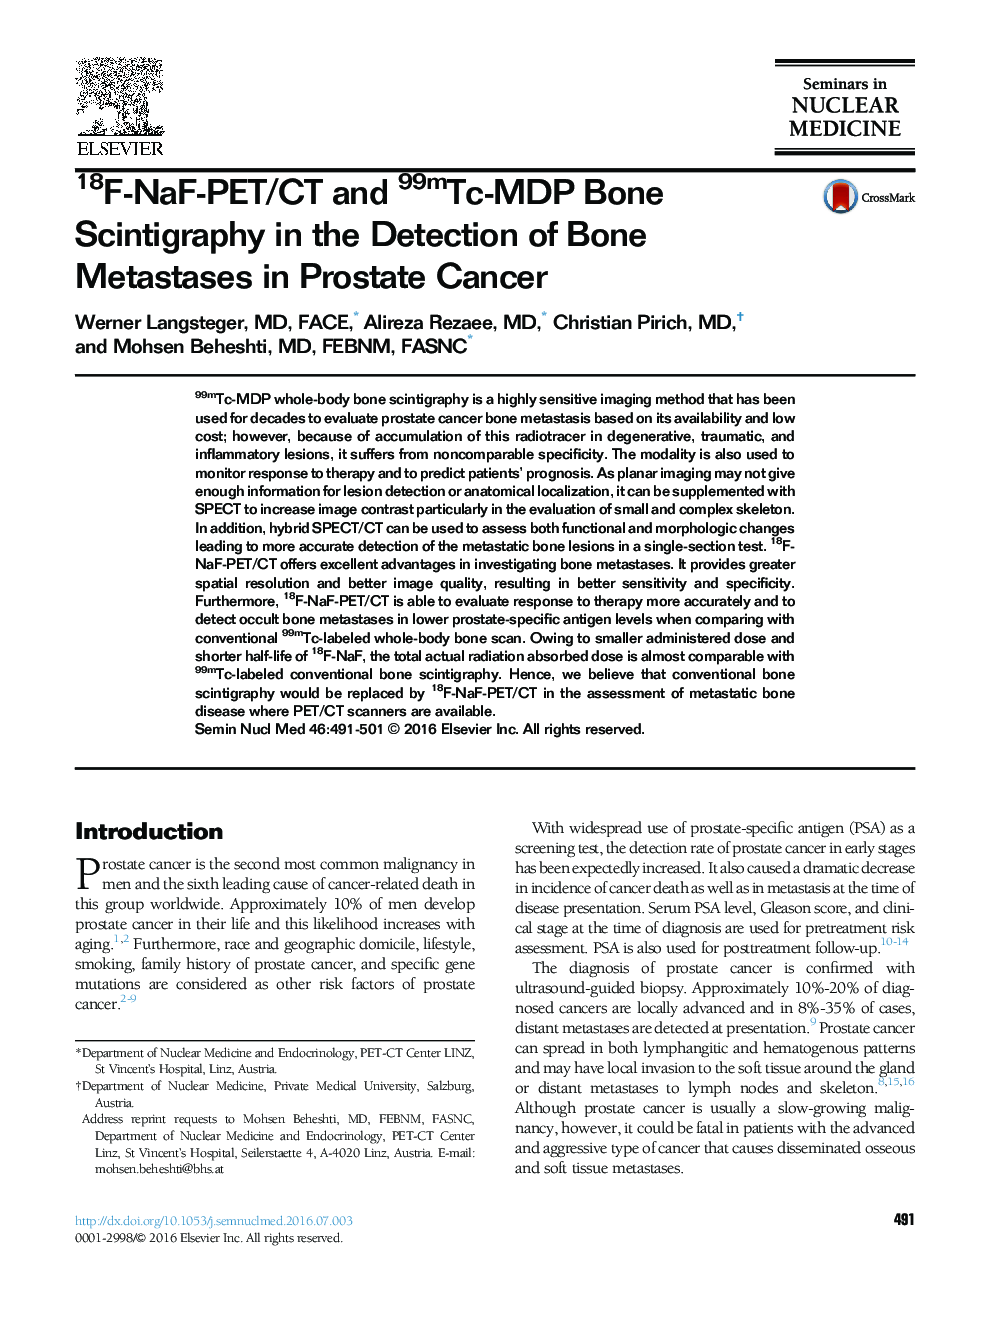 18F-NaF-PET/CT and 99mTc-MDP Bone Scintigraphy in the Detection of Bone Metastases in Prostate Cancer